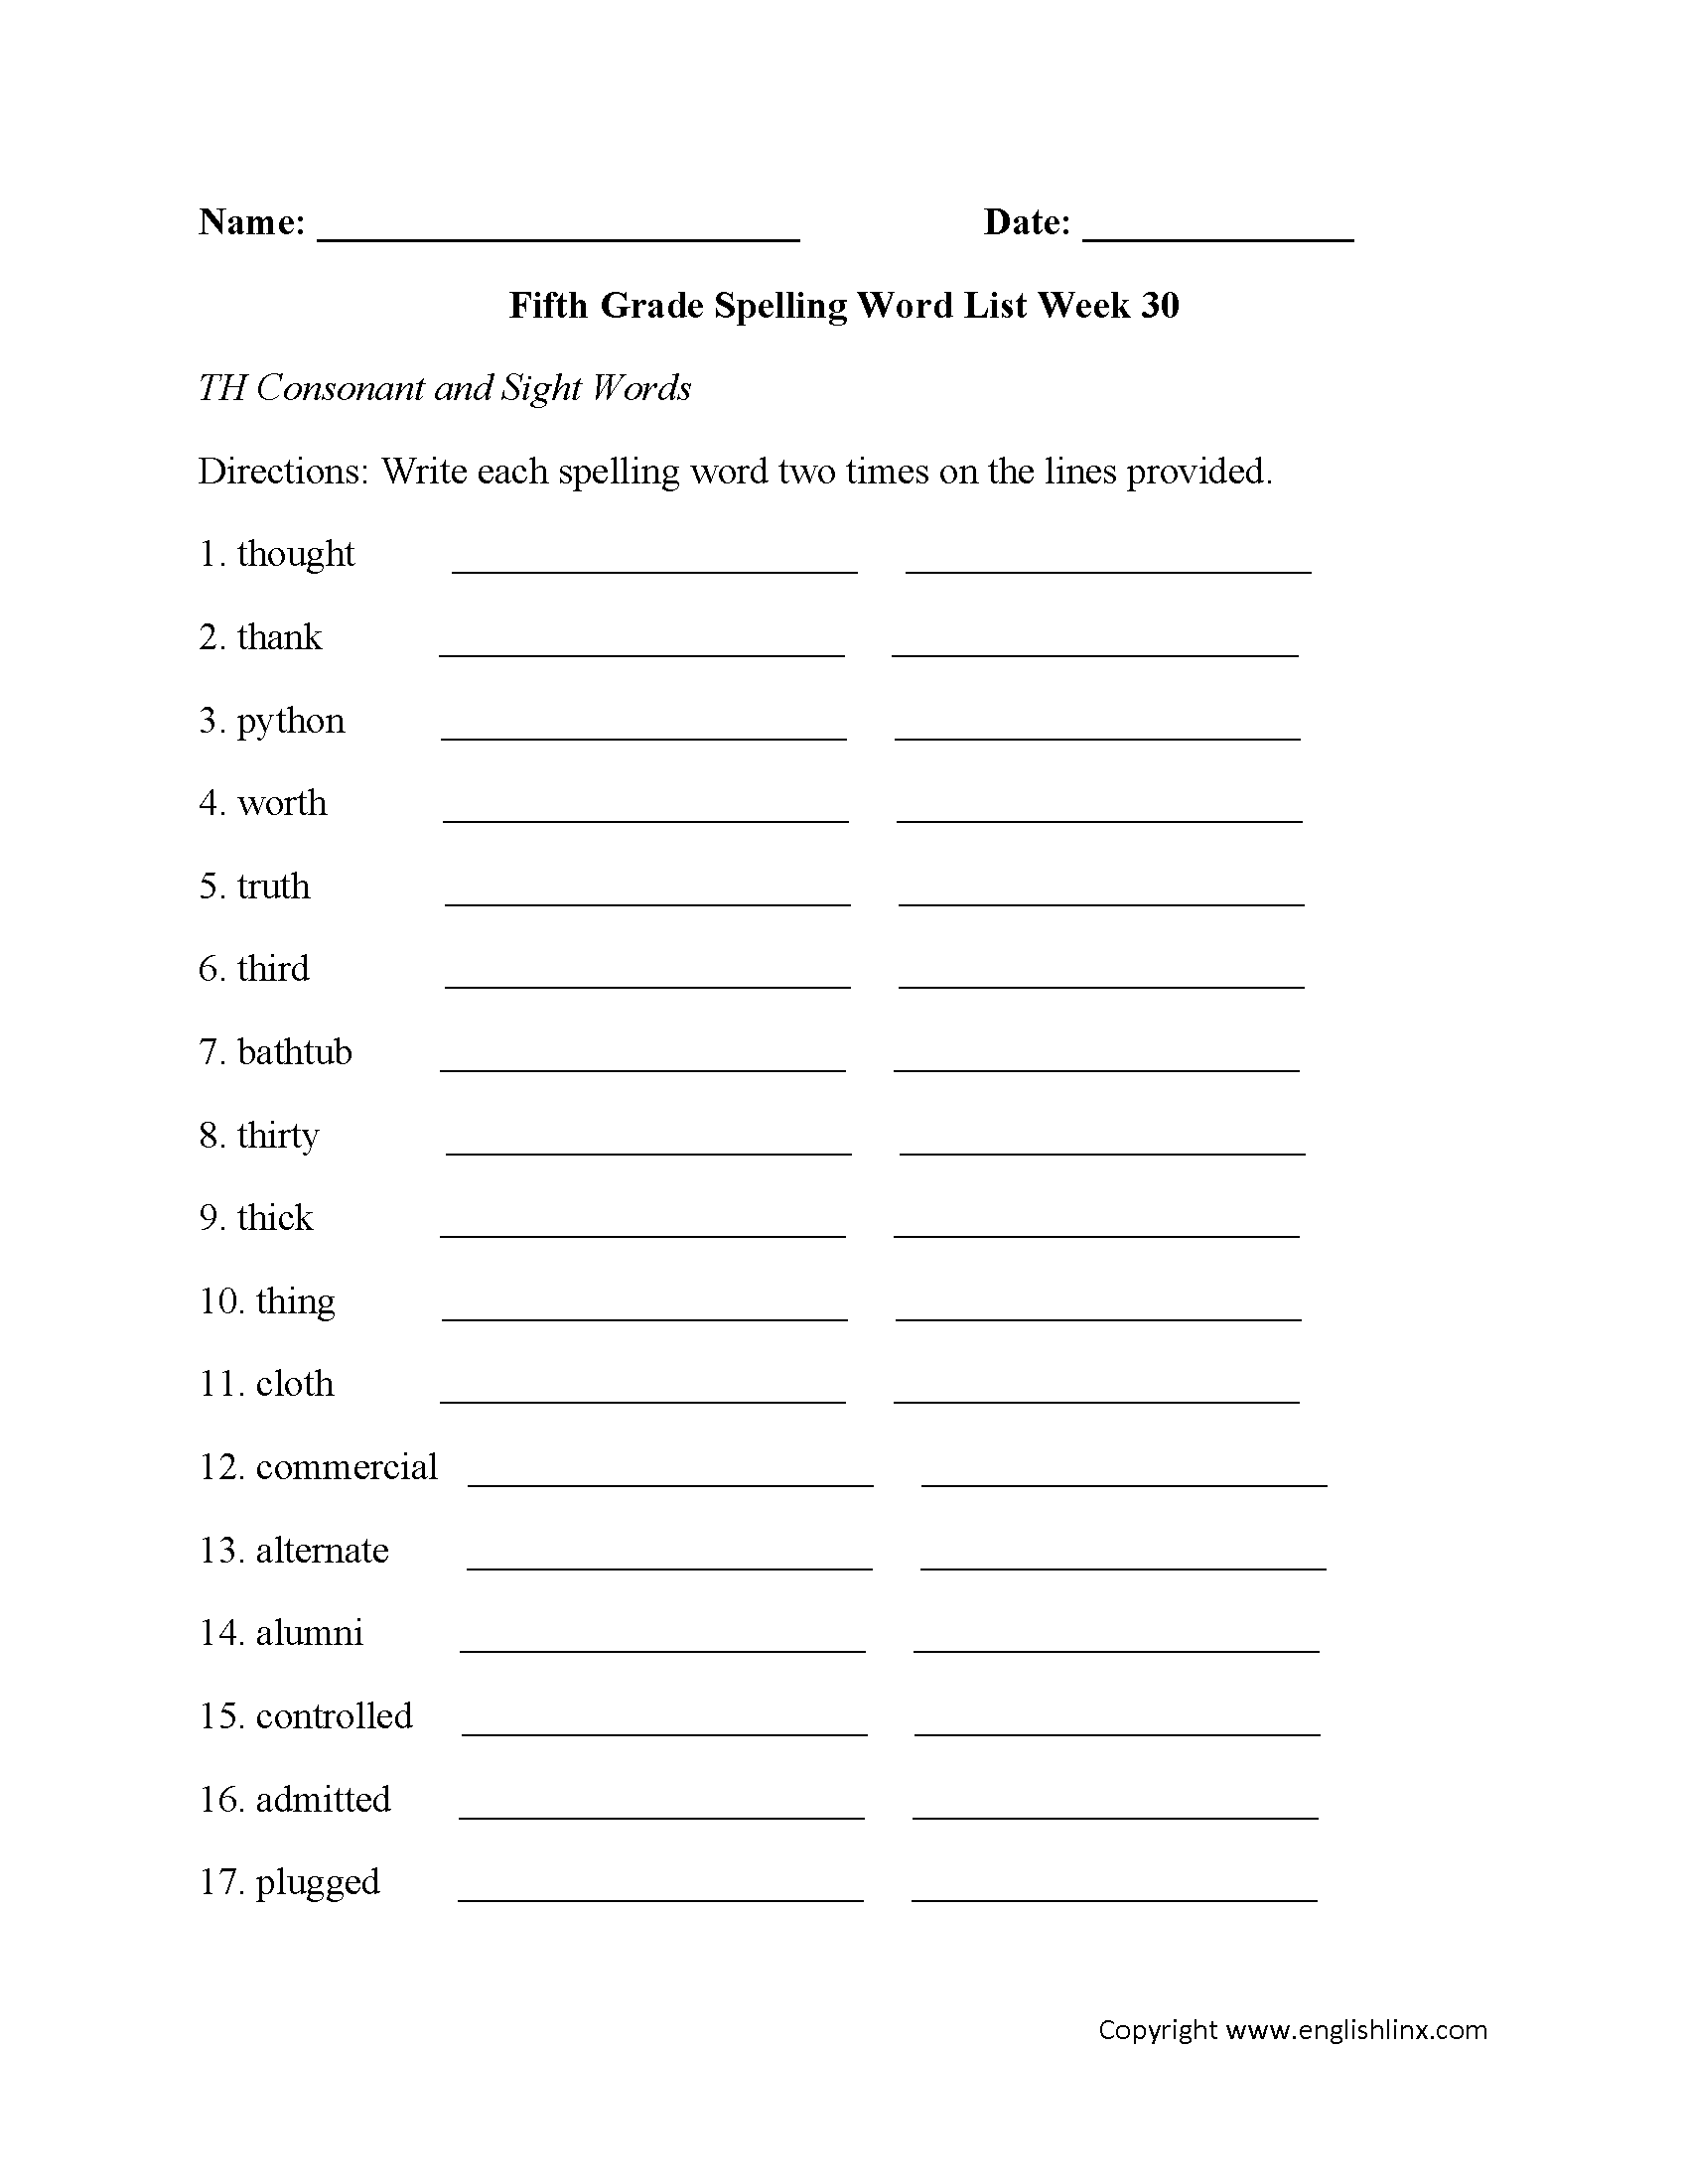 Week 30 TH Consonant and Sight Words Fifth Grade Spelling Words Worksheets